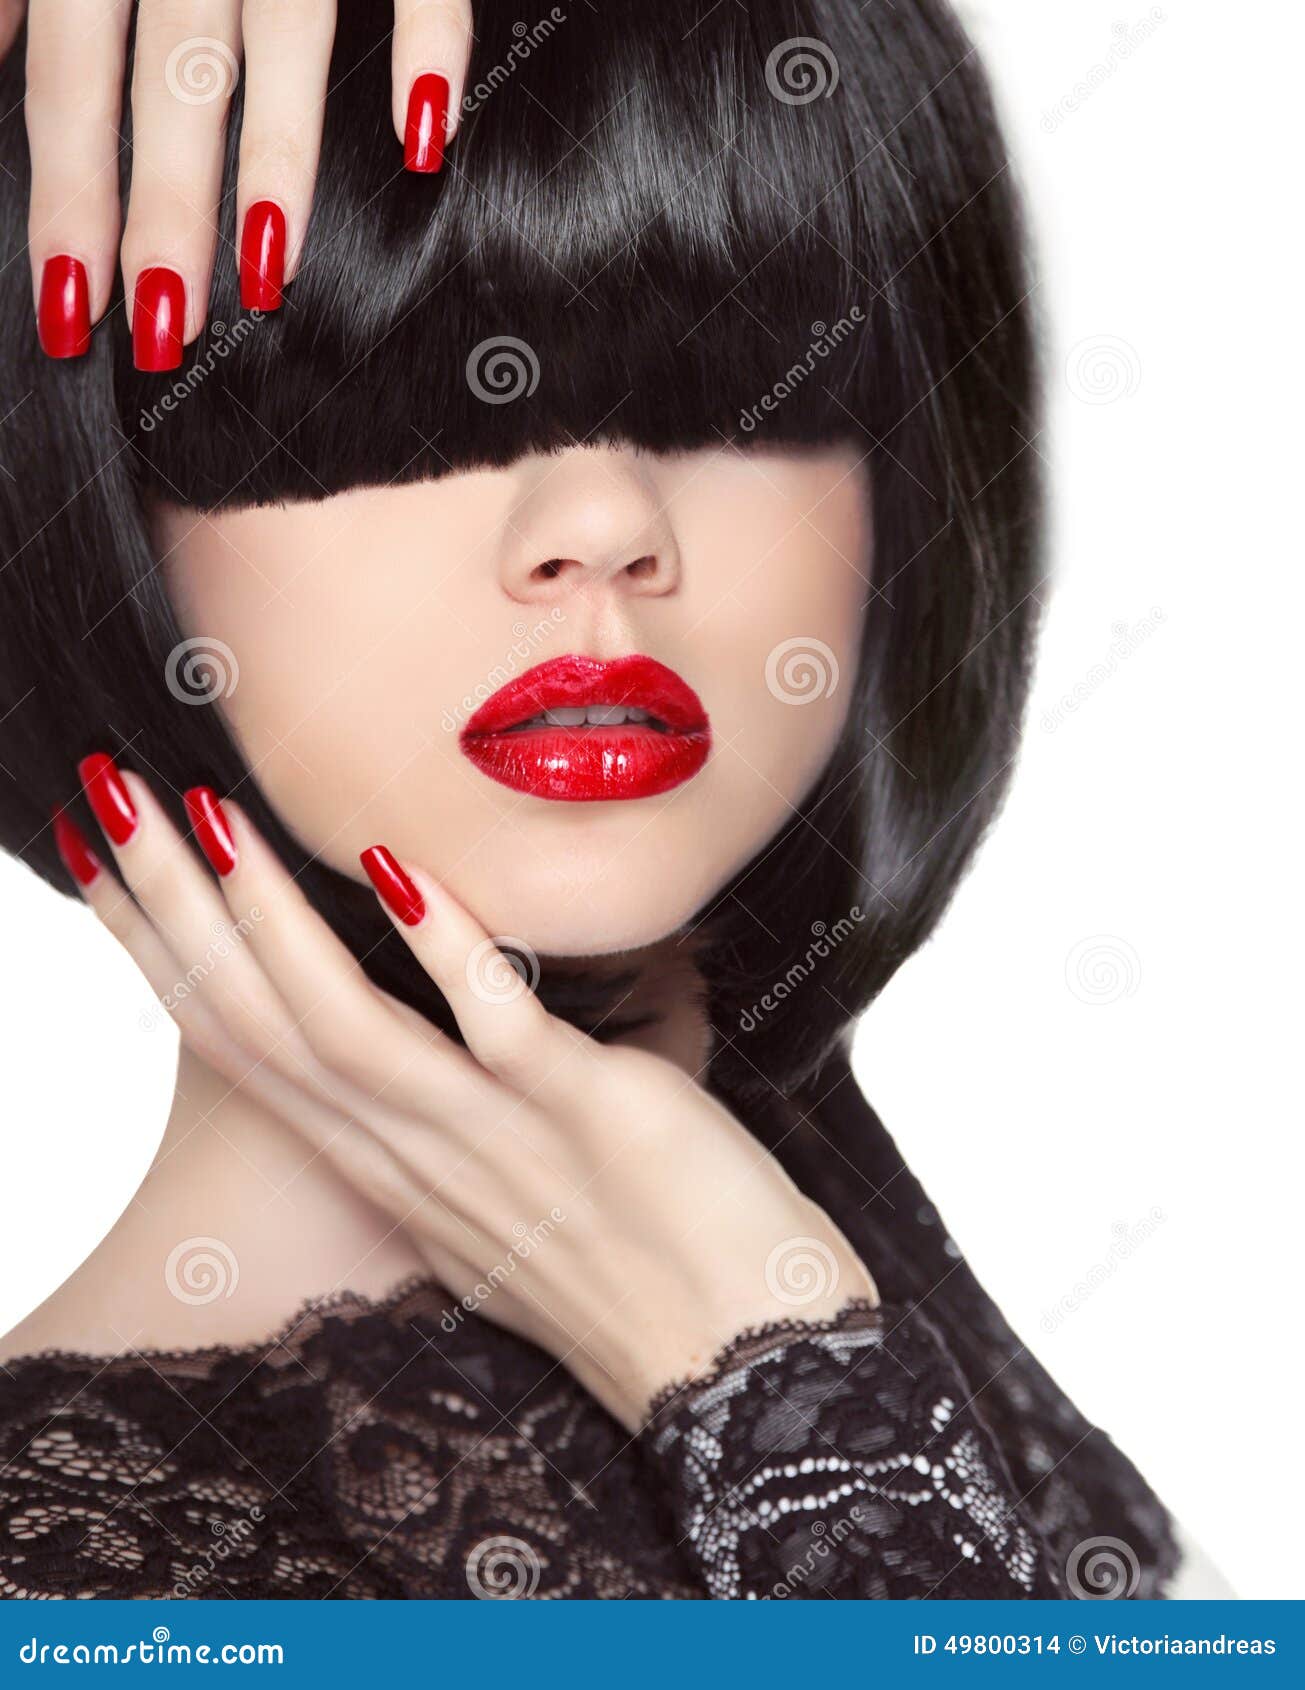 manicured nails. red lips. black bob hairstyle. brunette girl